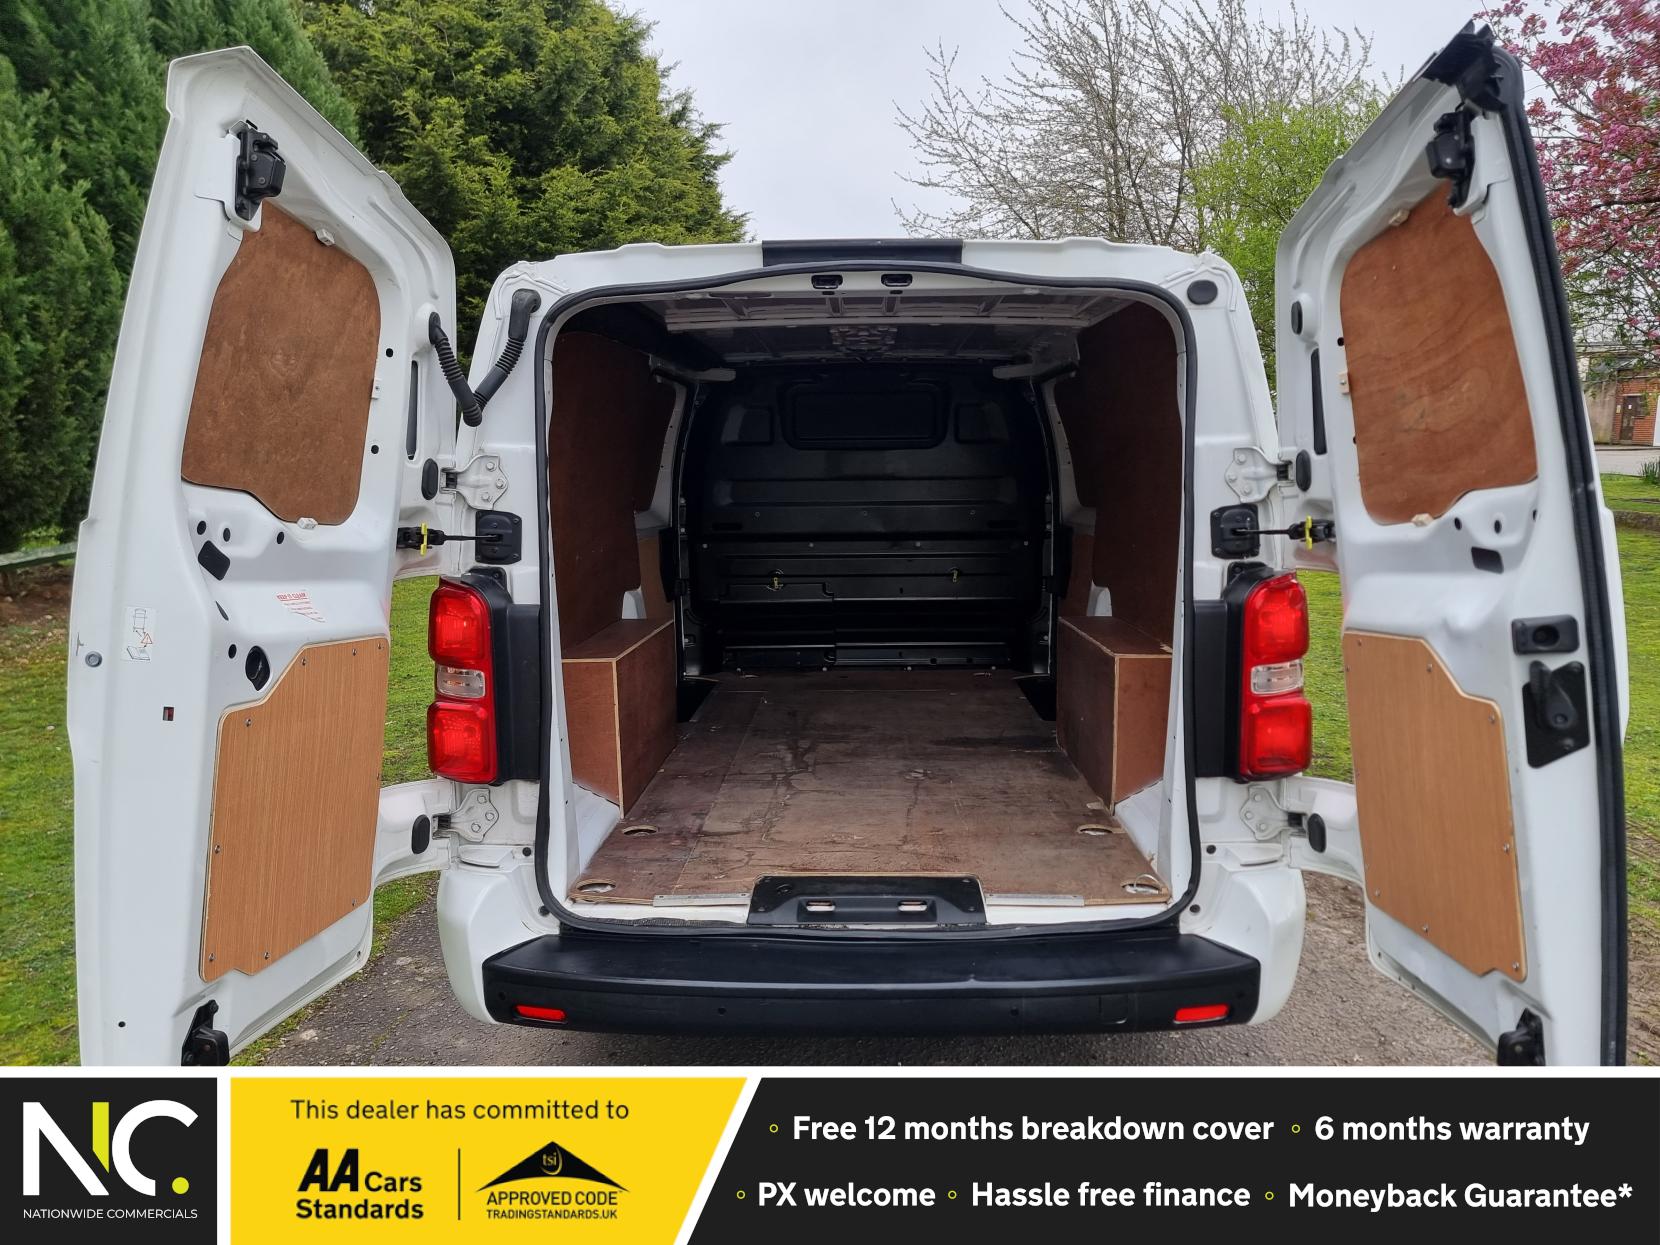 Vauxhall Vivaro 1.5 Turbo D 2900 Sportive Panel Van 5dr L2 H1 (100 ps) Diesel Manual ⭐️ Euro 6 ⭐️  One Owner ⭐️  Finance Available